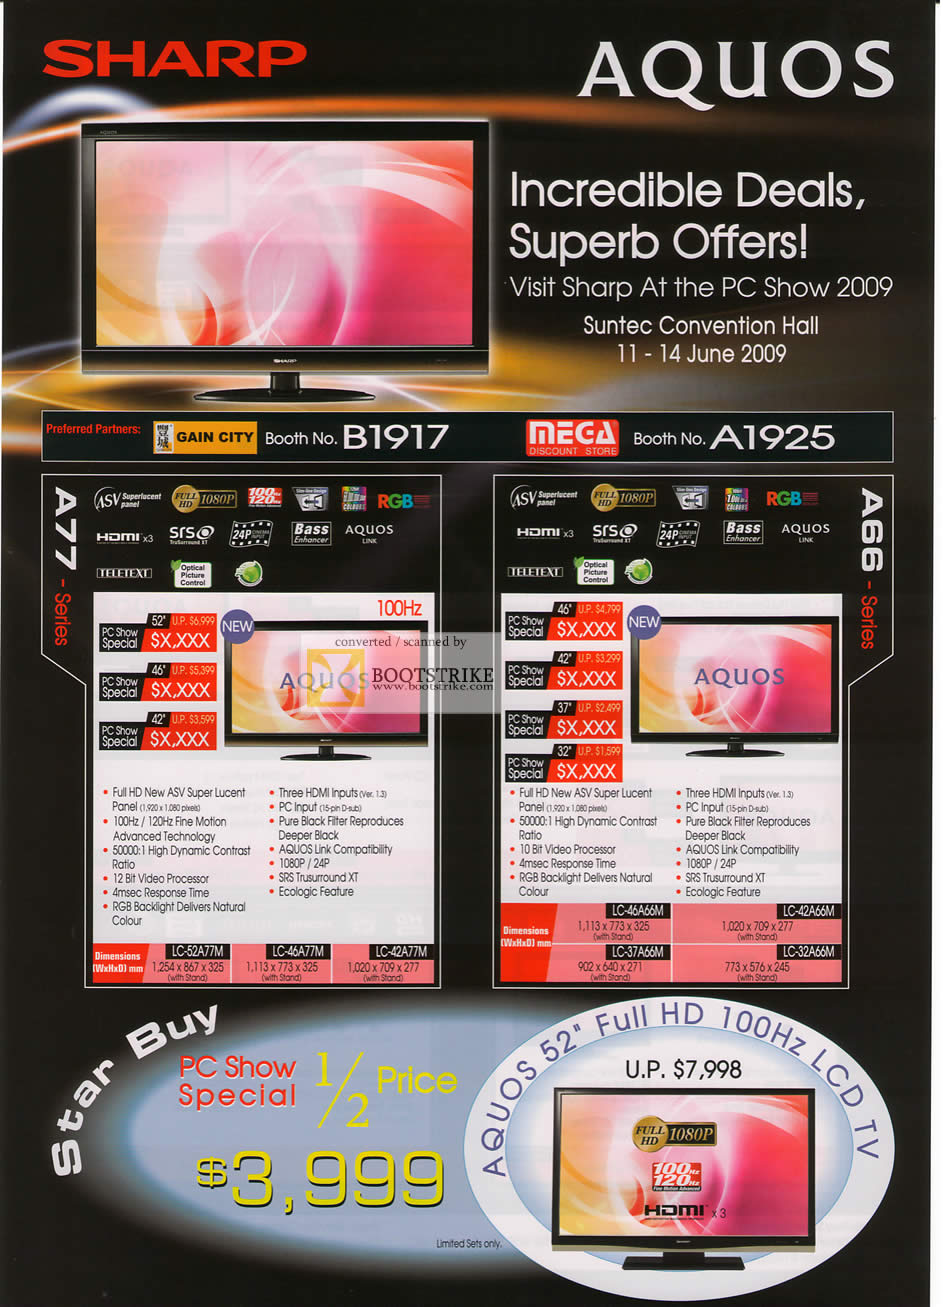 PC Show 2009 price list image brochure of Sharp Aquos LCD TVs A77 A66